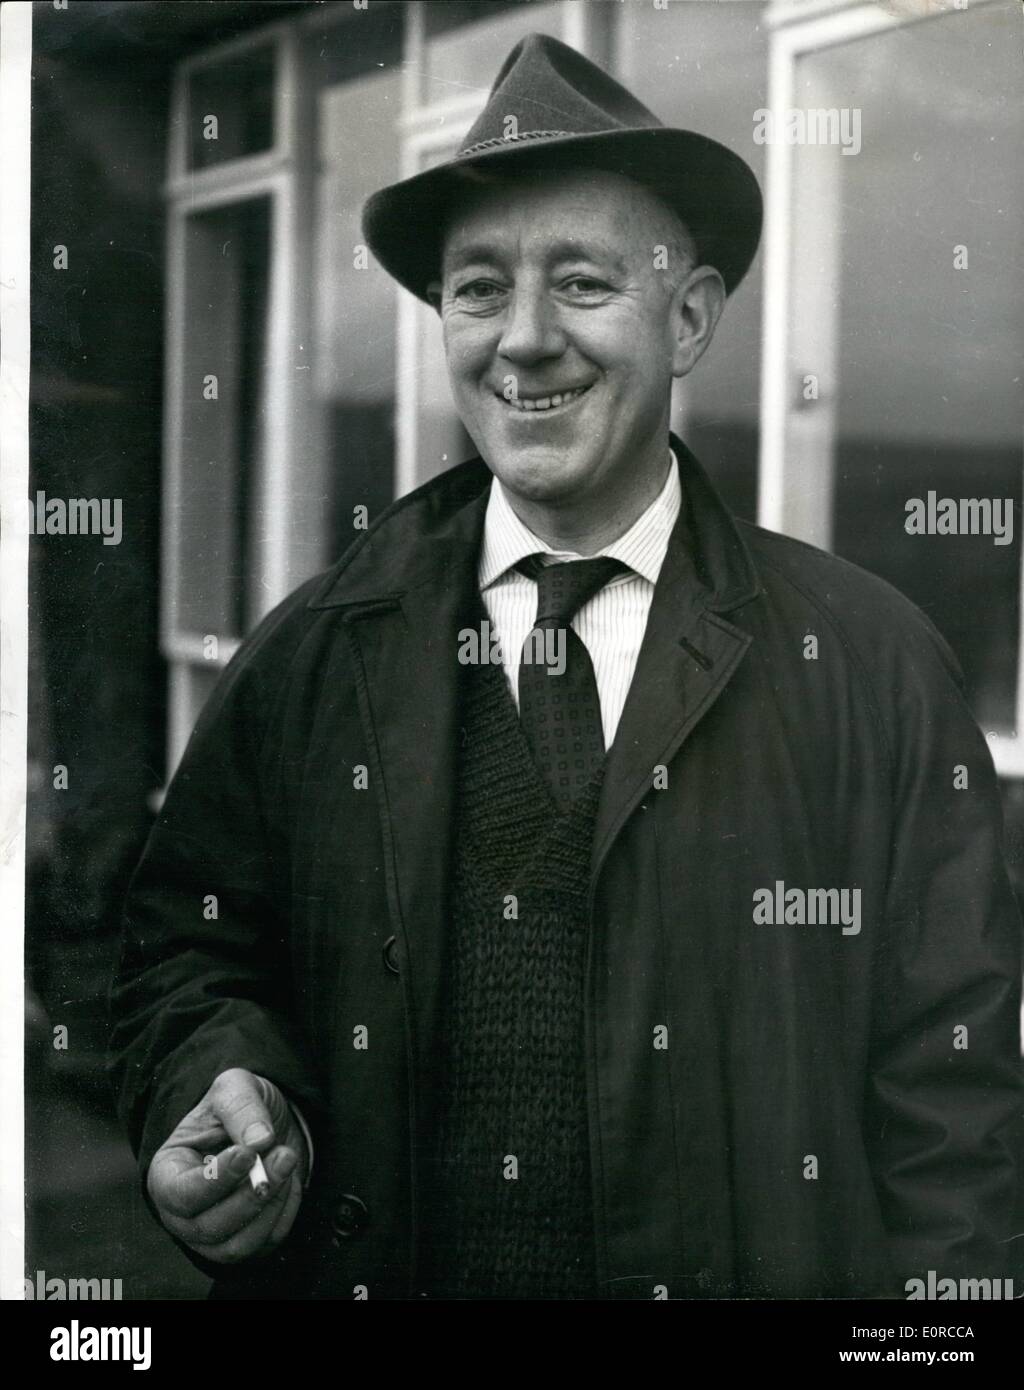 Jan. 01, 1959 - Actor Alec Guinness Receives A Knighthood In The New Year Honours List: Actor Alec Guinness, acclaimed on both sides of the Atlantic as Best Actor of the Year for his performance in the film ''The Bridge Over The River Kwai'', has been awarded a Knighthood in the New Year Honours Liot, and now becomes Sir Alec Guinness. Photo Shows Yesterday's picture of Sir Alec Guinness taken at his home in Petersfield Hampshire. Stock Photo